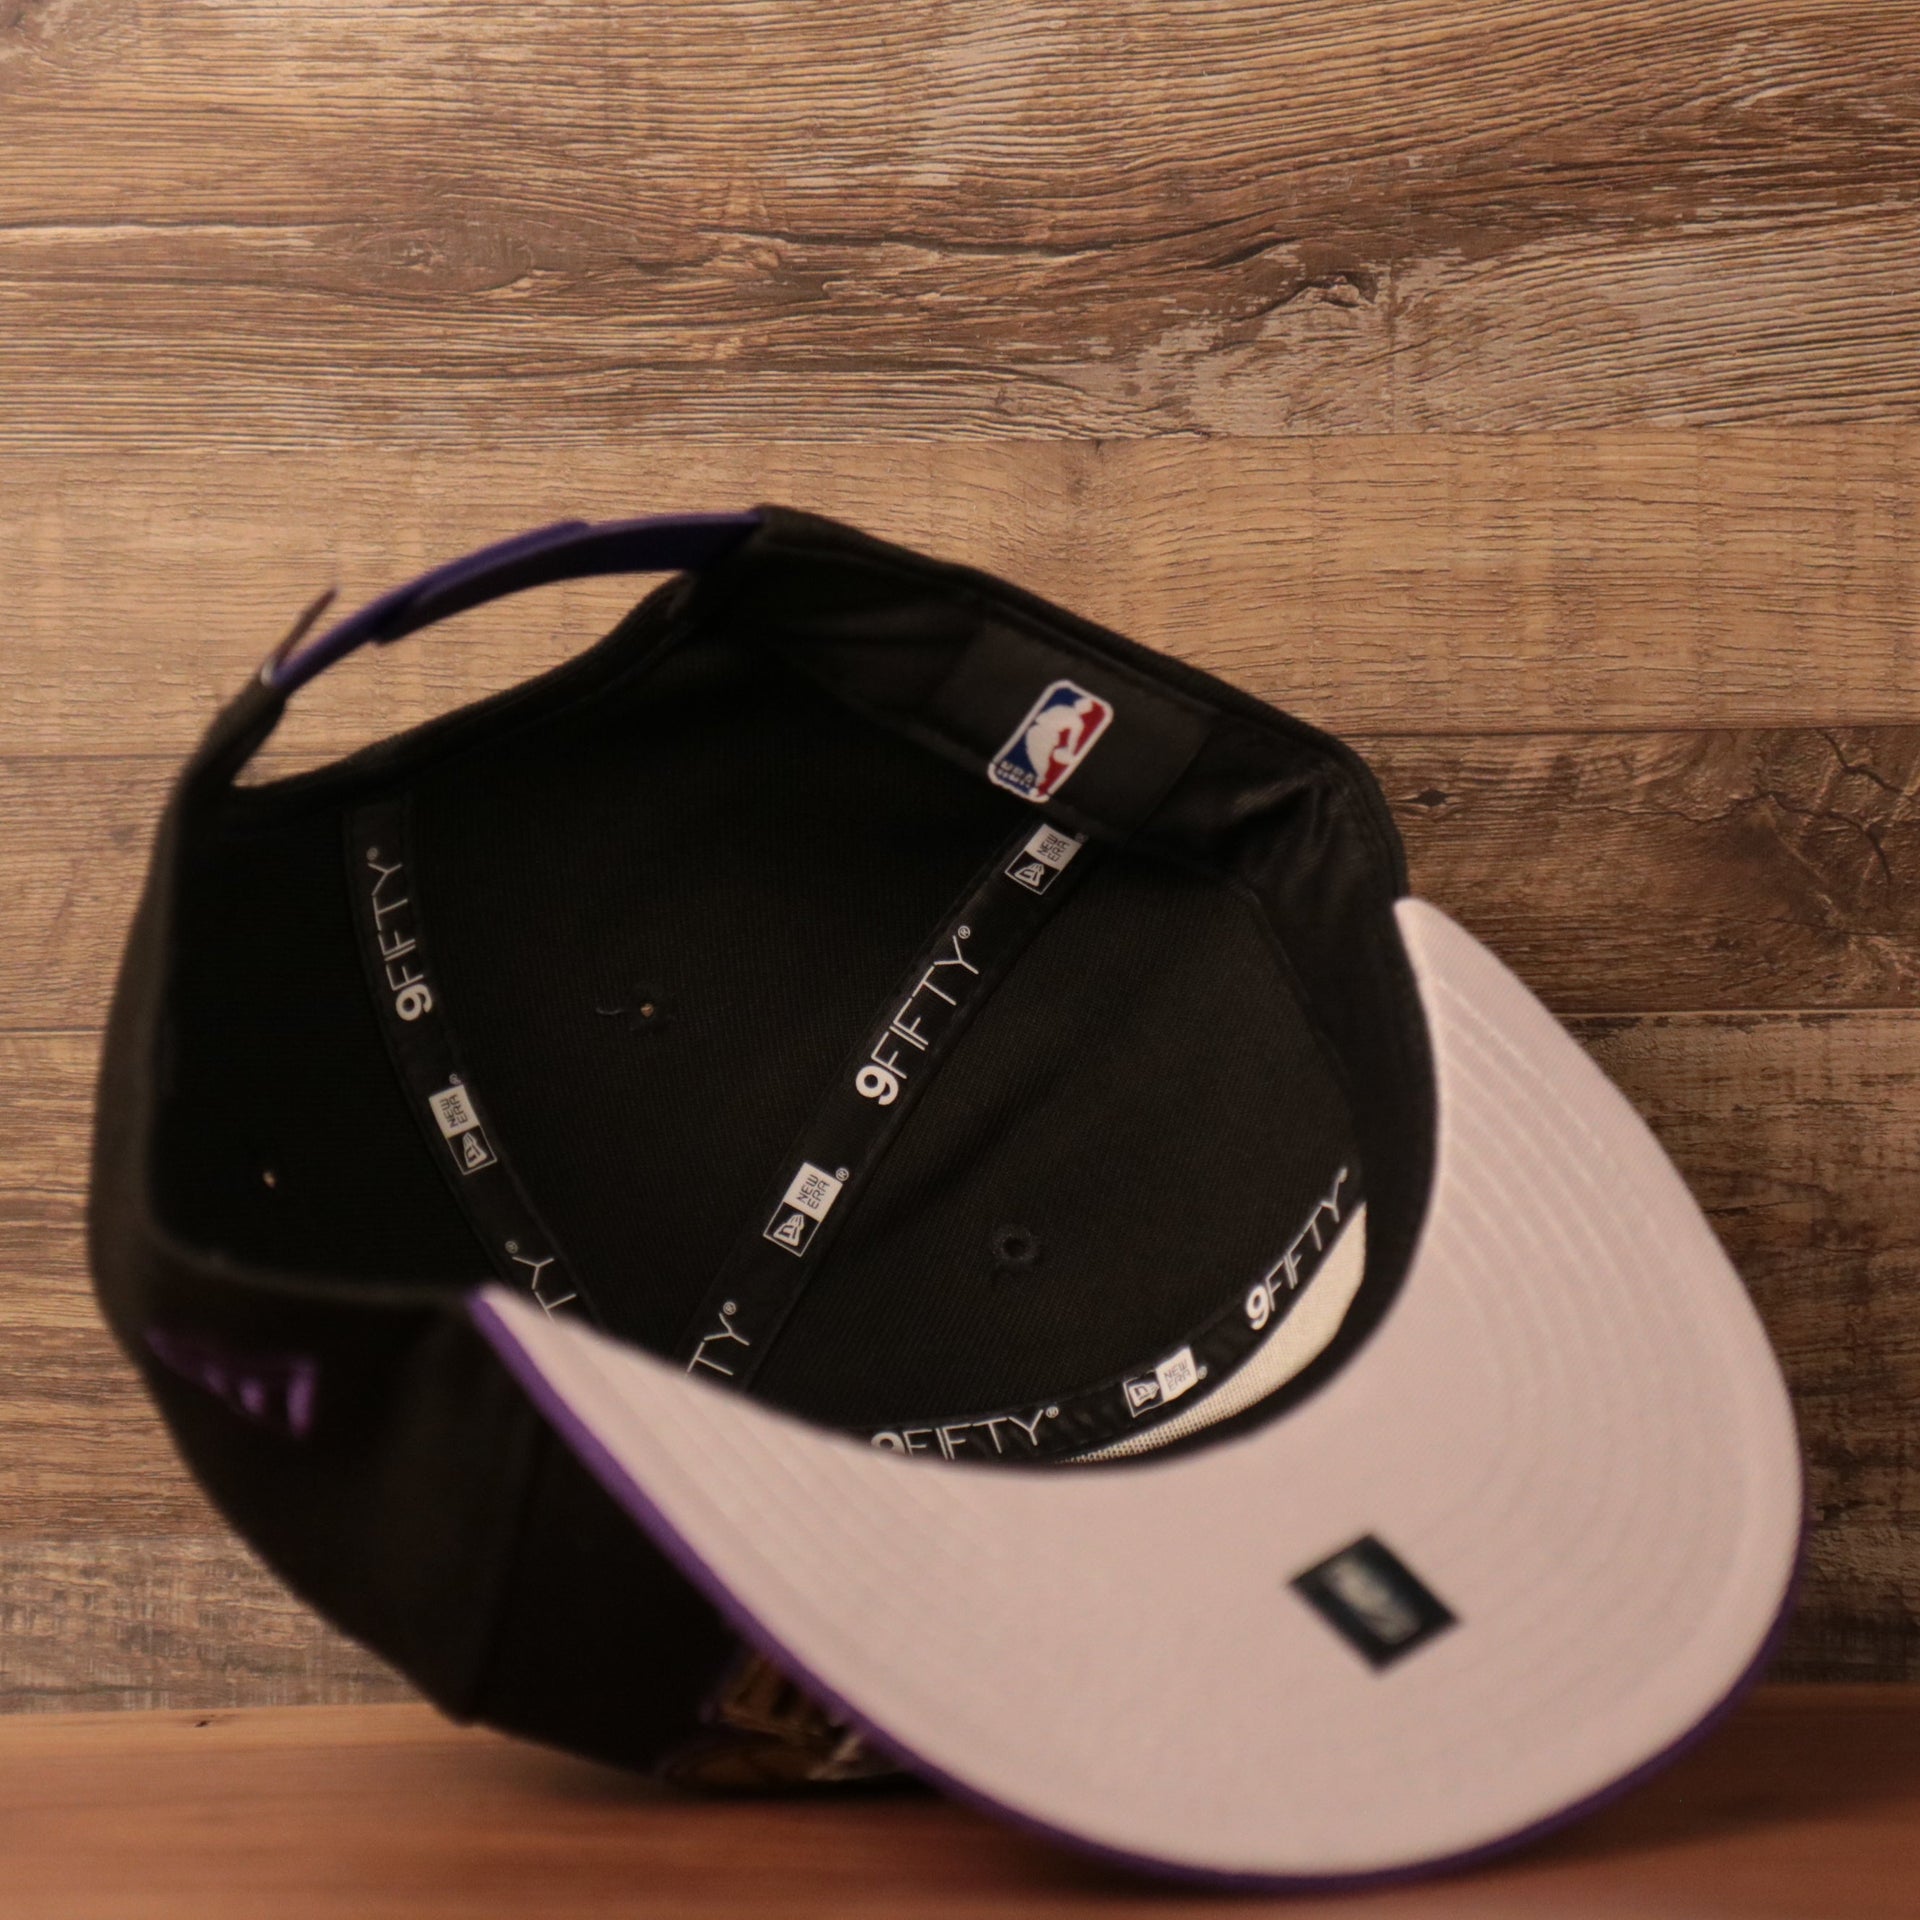 The Lakers NBA 2020 black/purple snapback hat with gray underbrim.